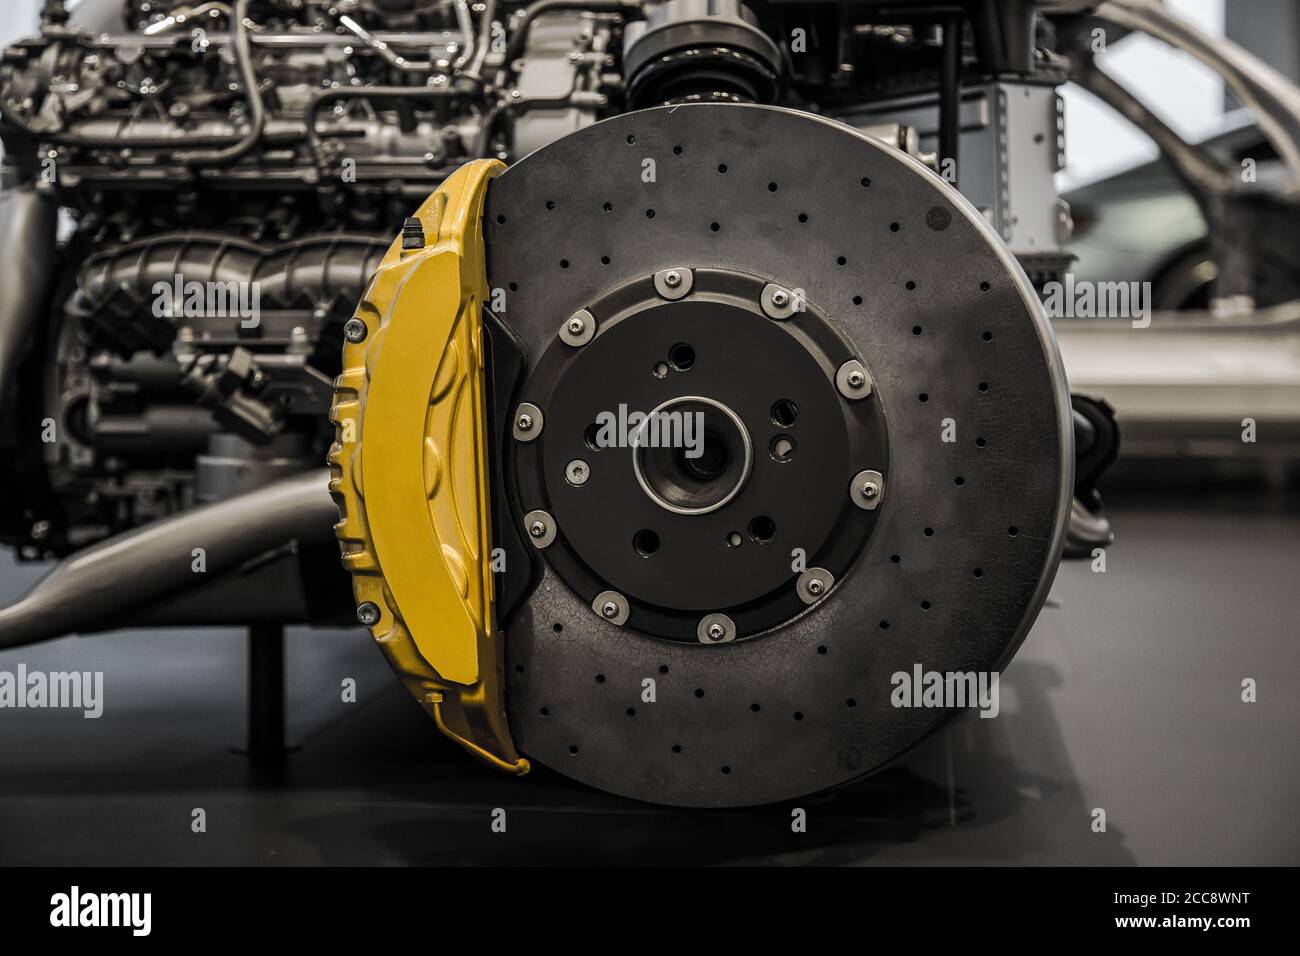 Automobile braking system. Ceramic carbon disk with perforation, ventilation and yellow calipers. Stock Photo